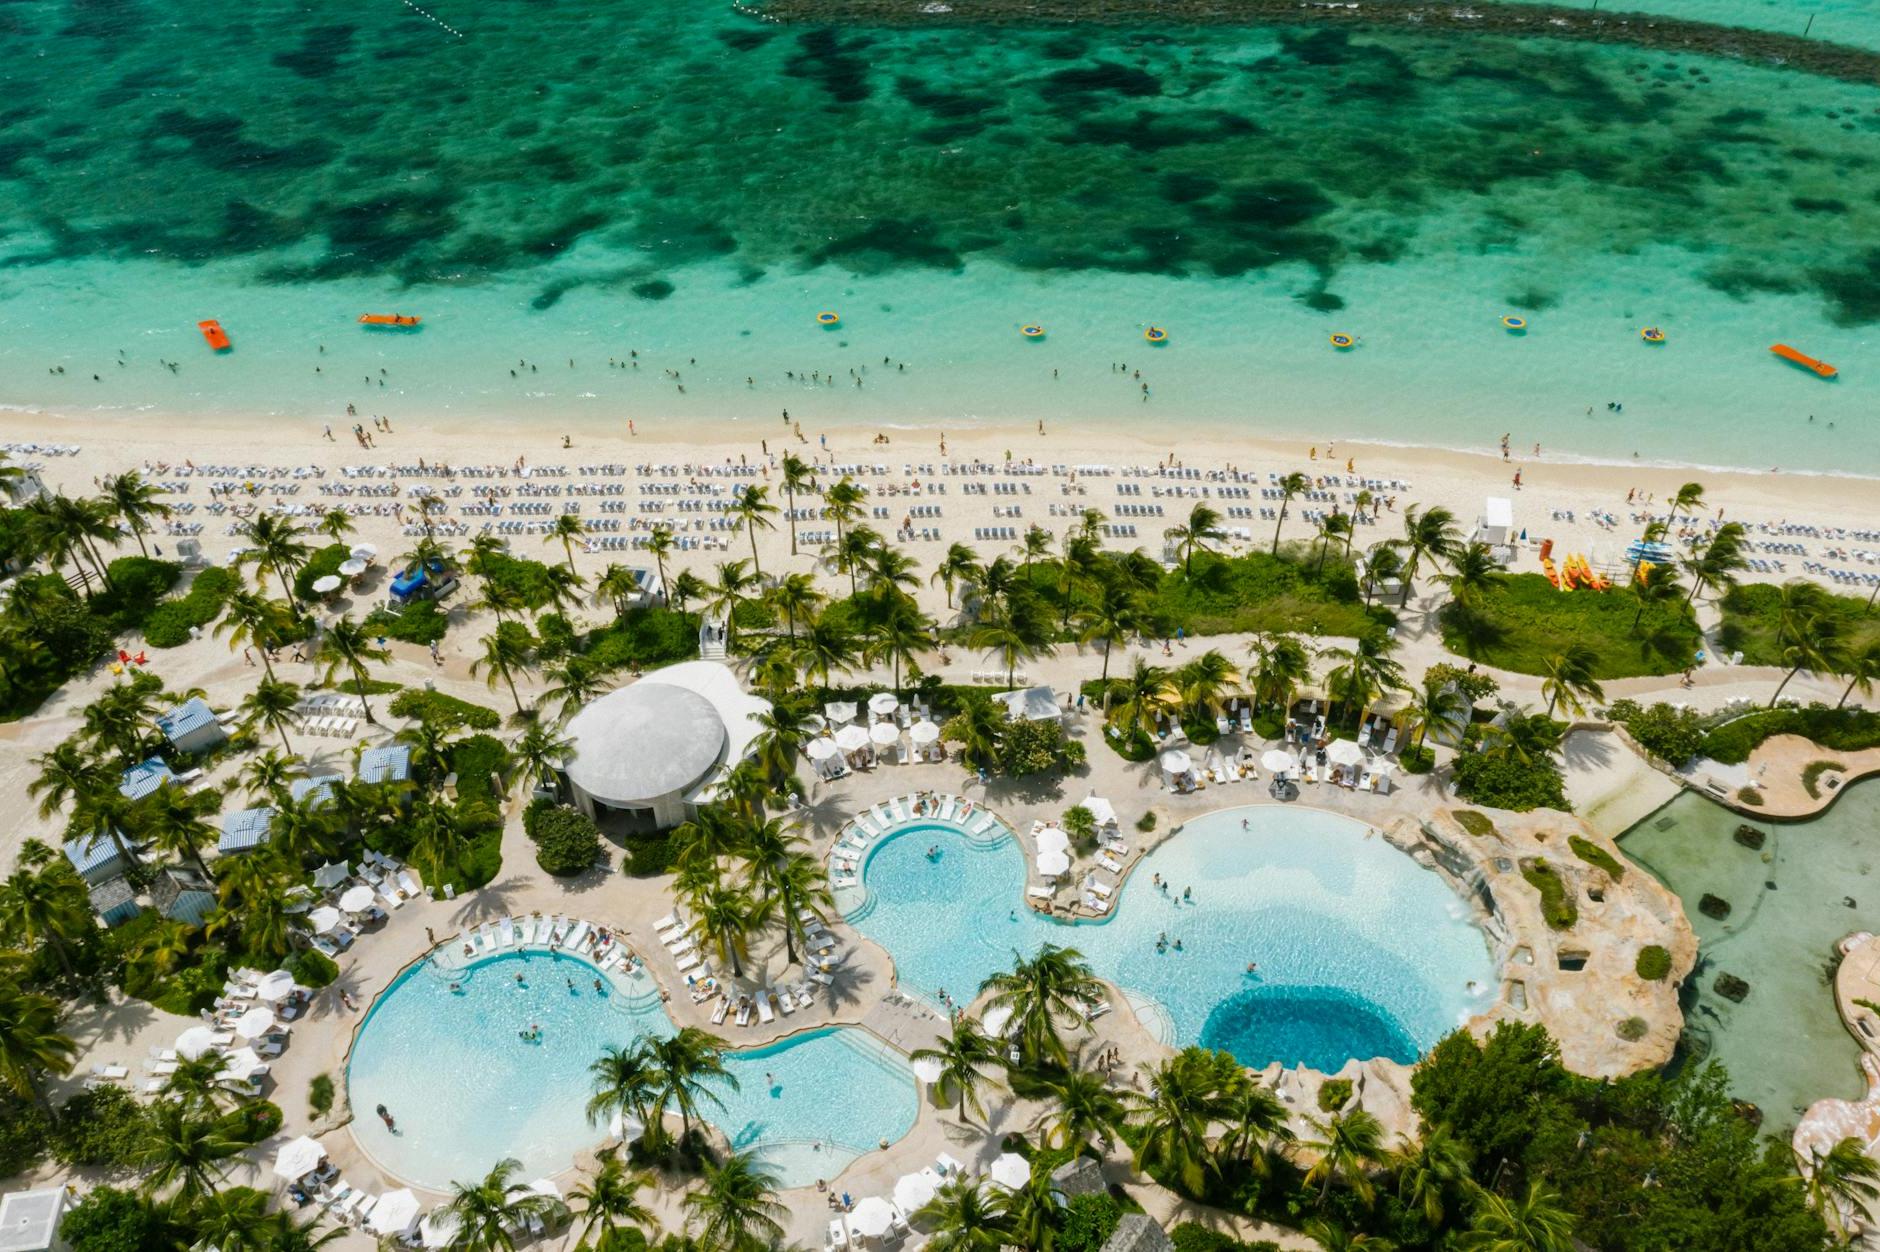 Birds Eye View of Swimming Pools at a Beachfront Resort